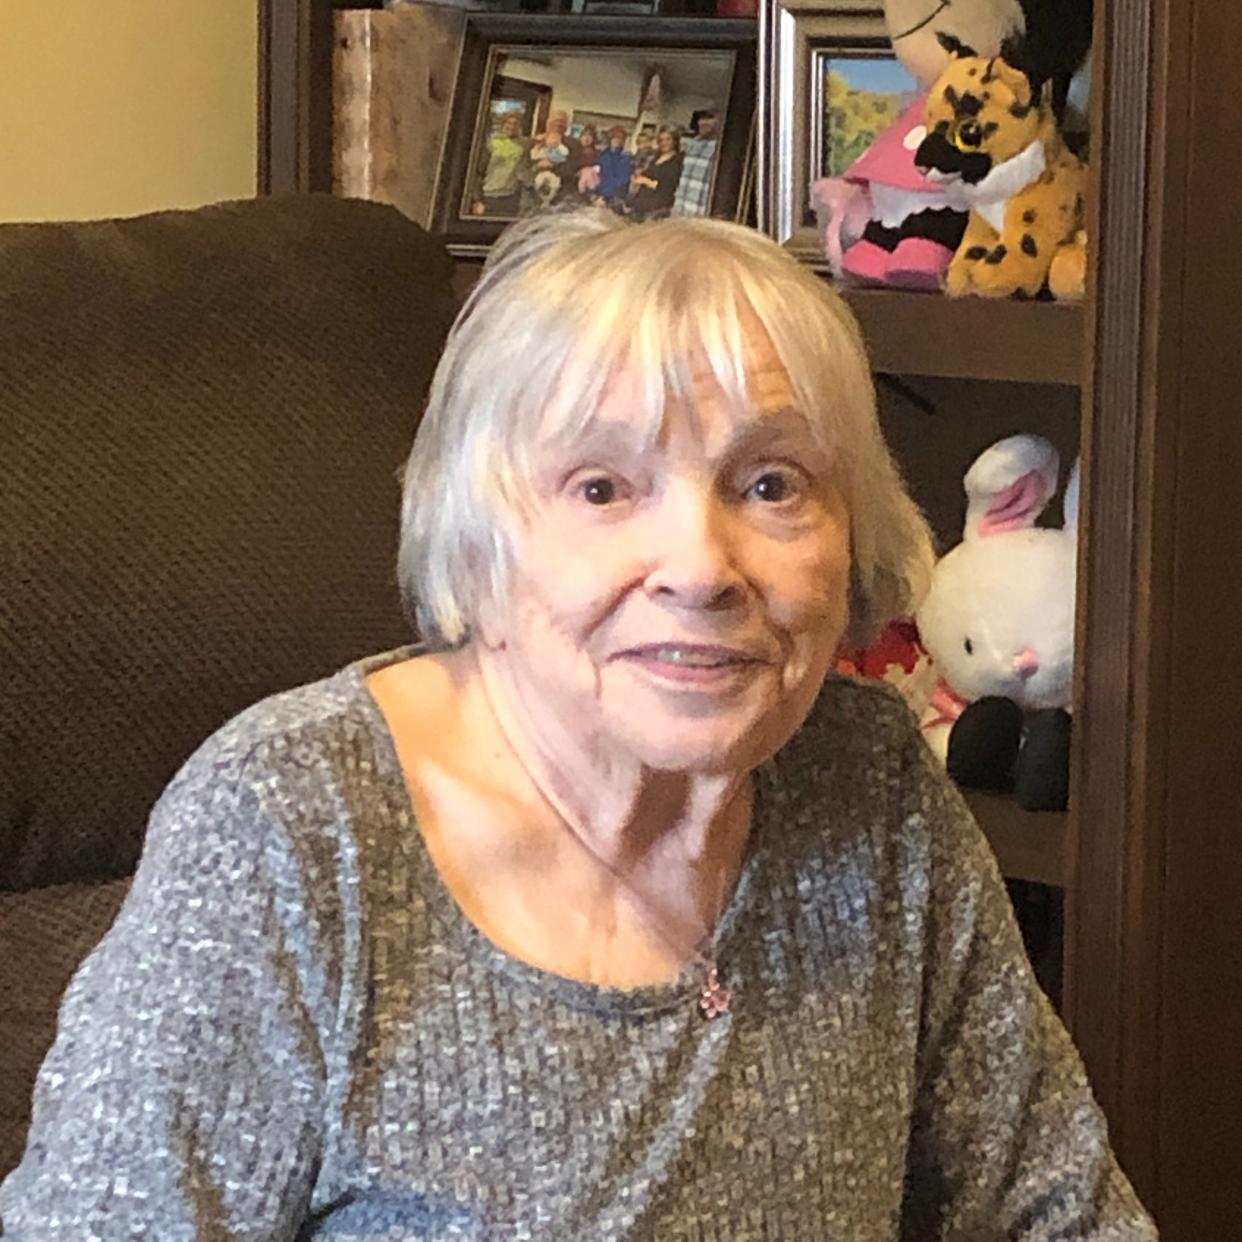 Michalene Saunier will gather Feb. 29, 2024, with her family on her 21st birthday. Saunier, who was born on leap day in 1940, is actually turning 84 this year.